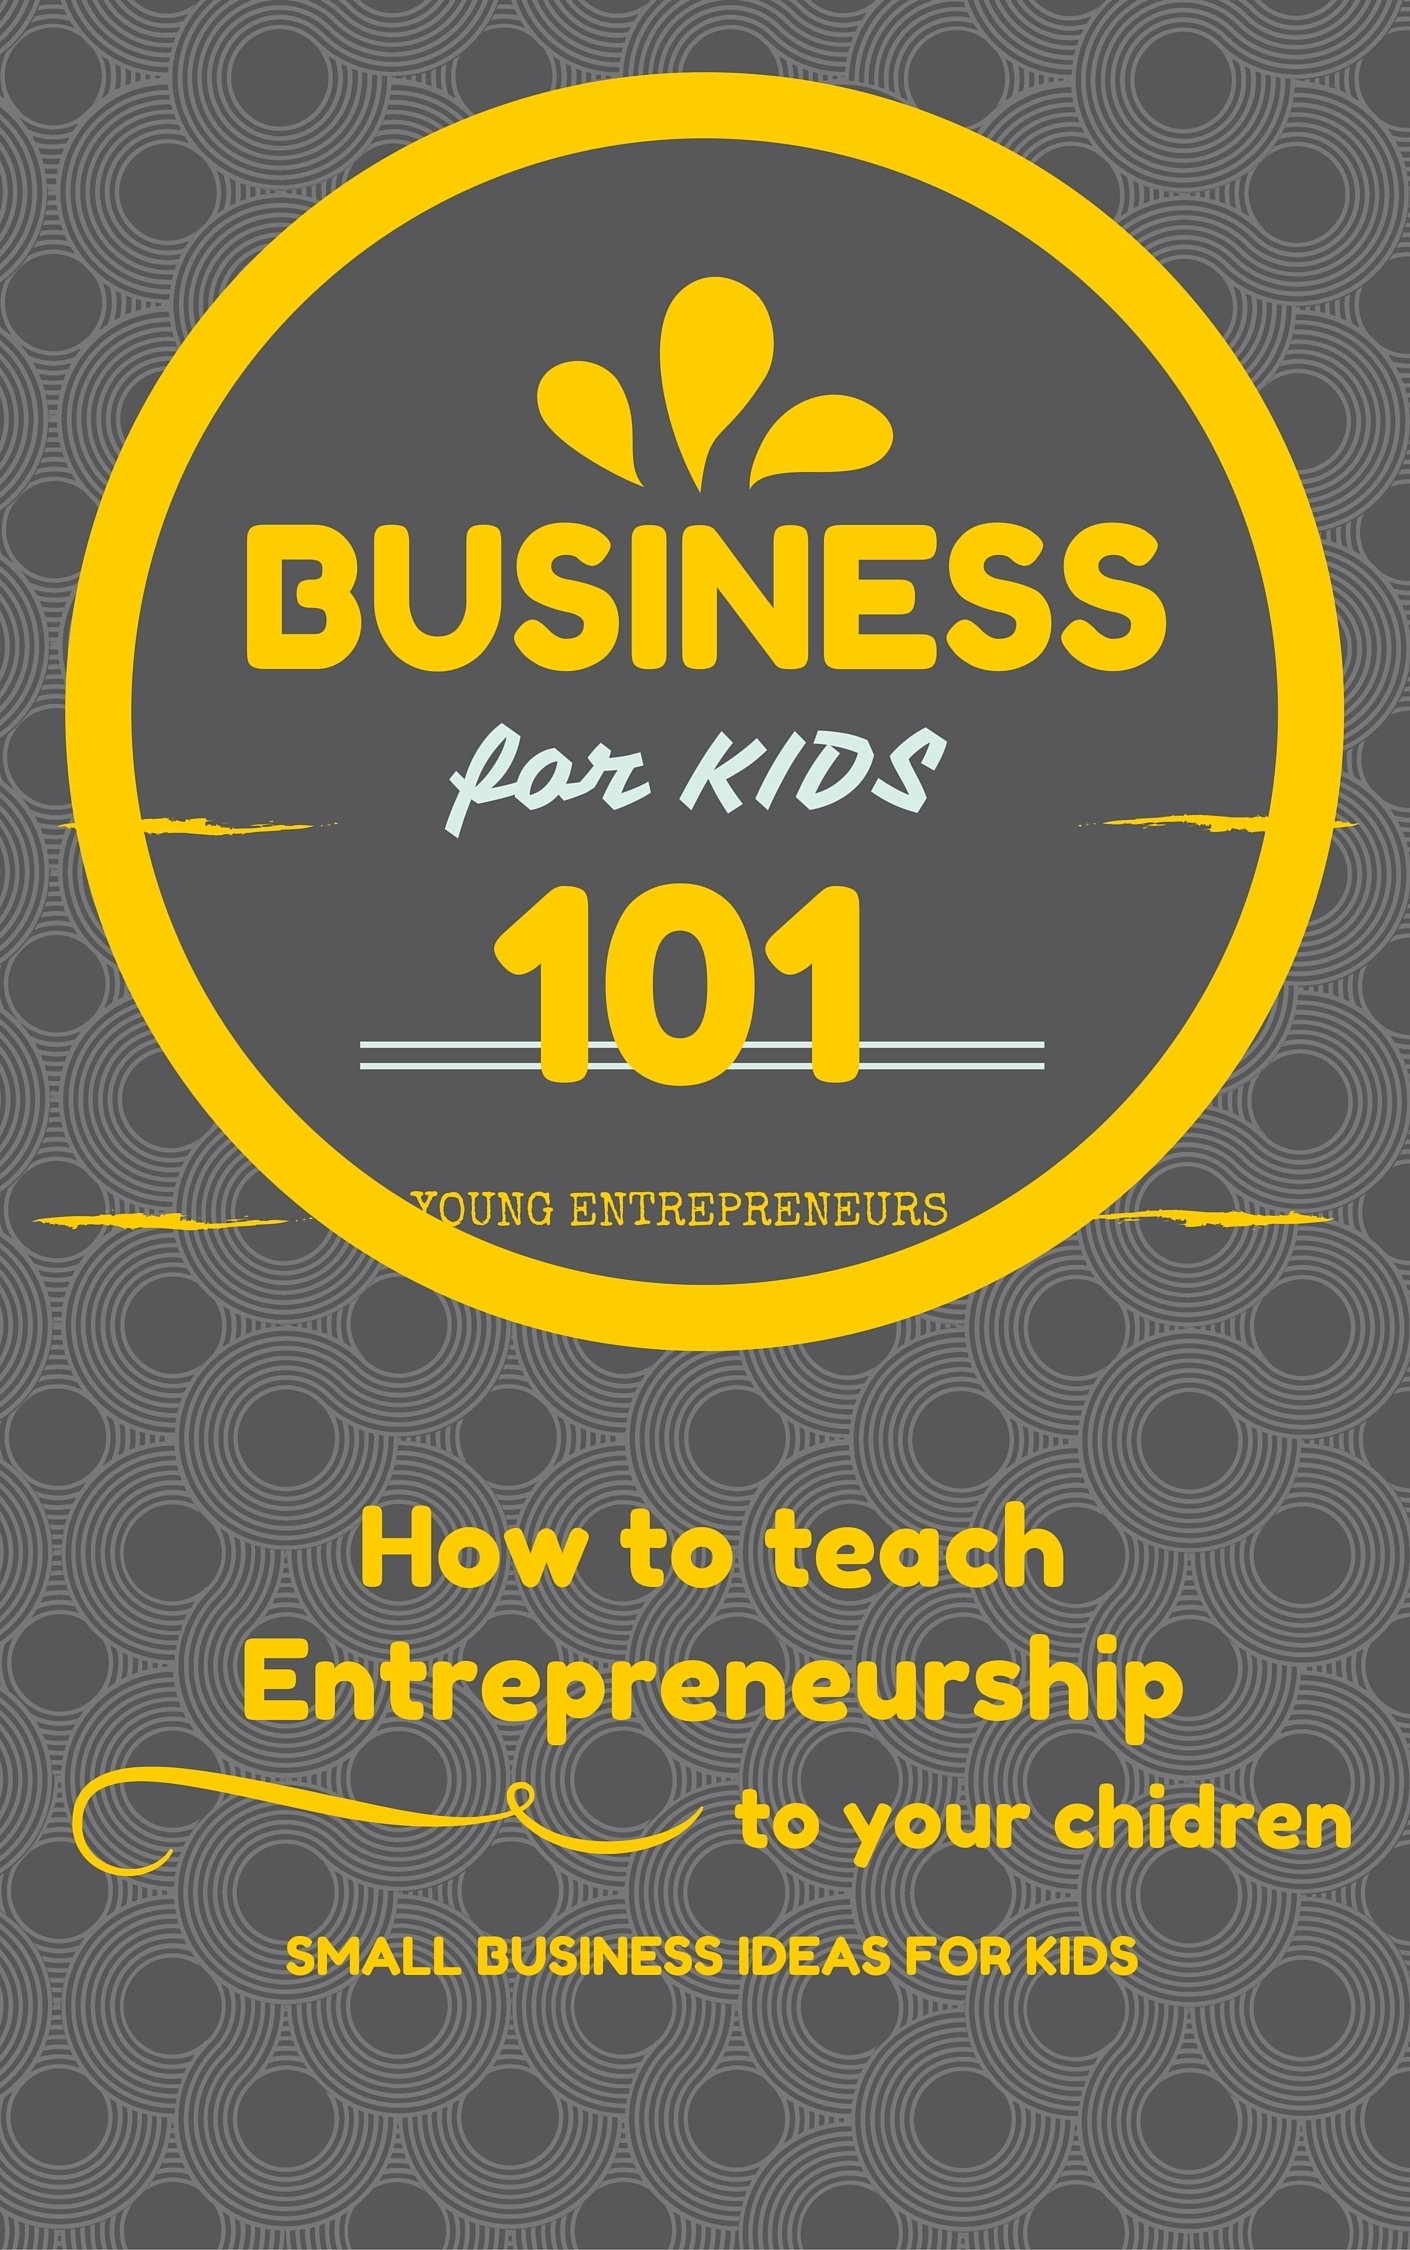 10 Most Recommended Small Business Ideas For Kids %name 2023